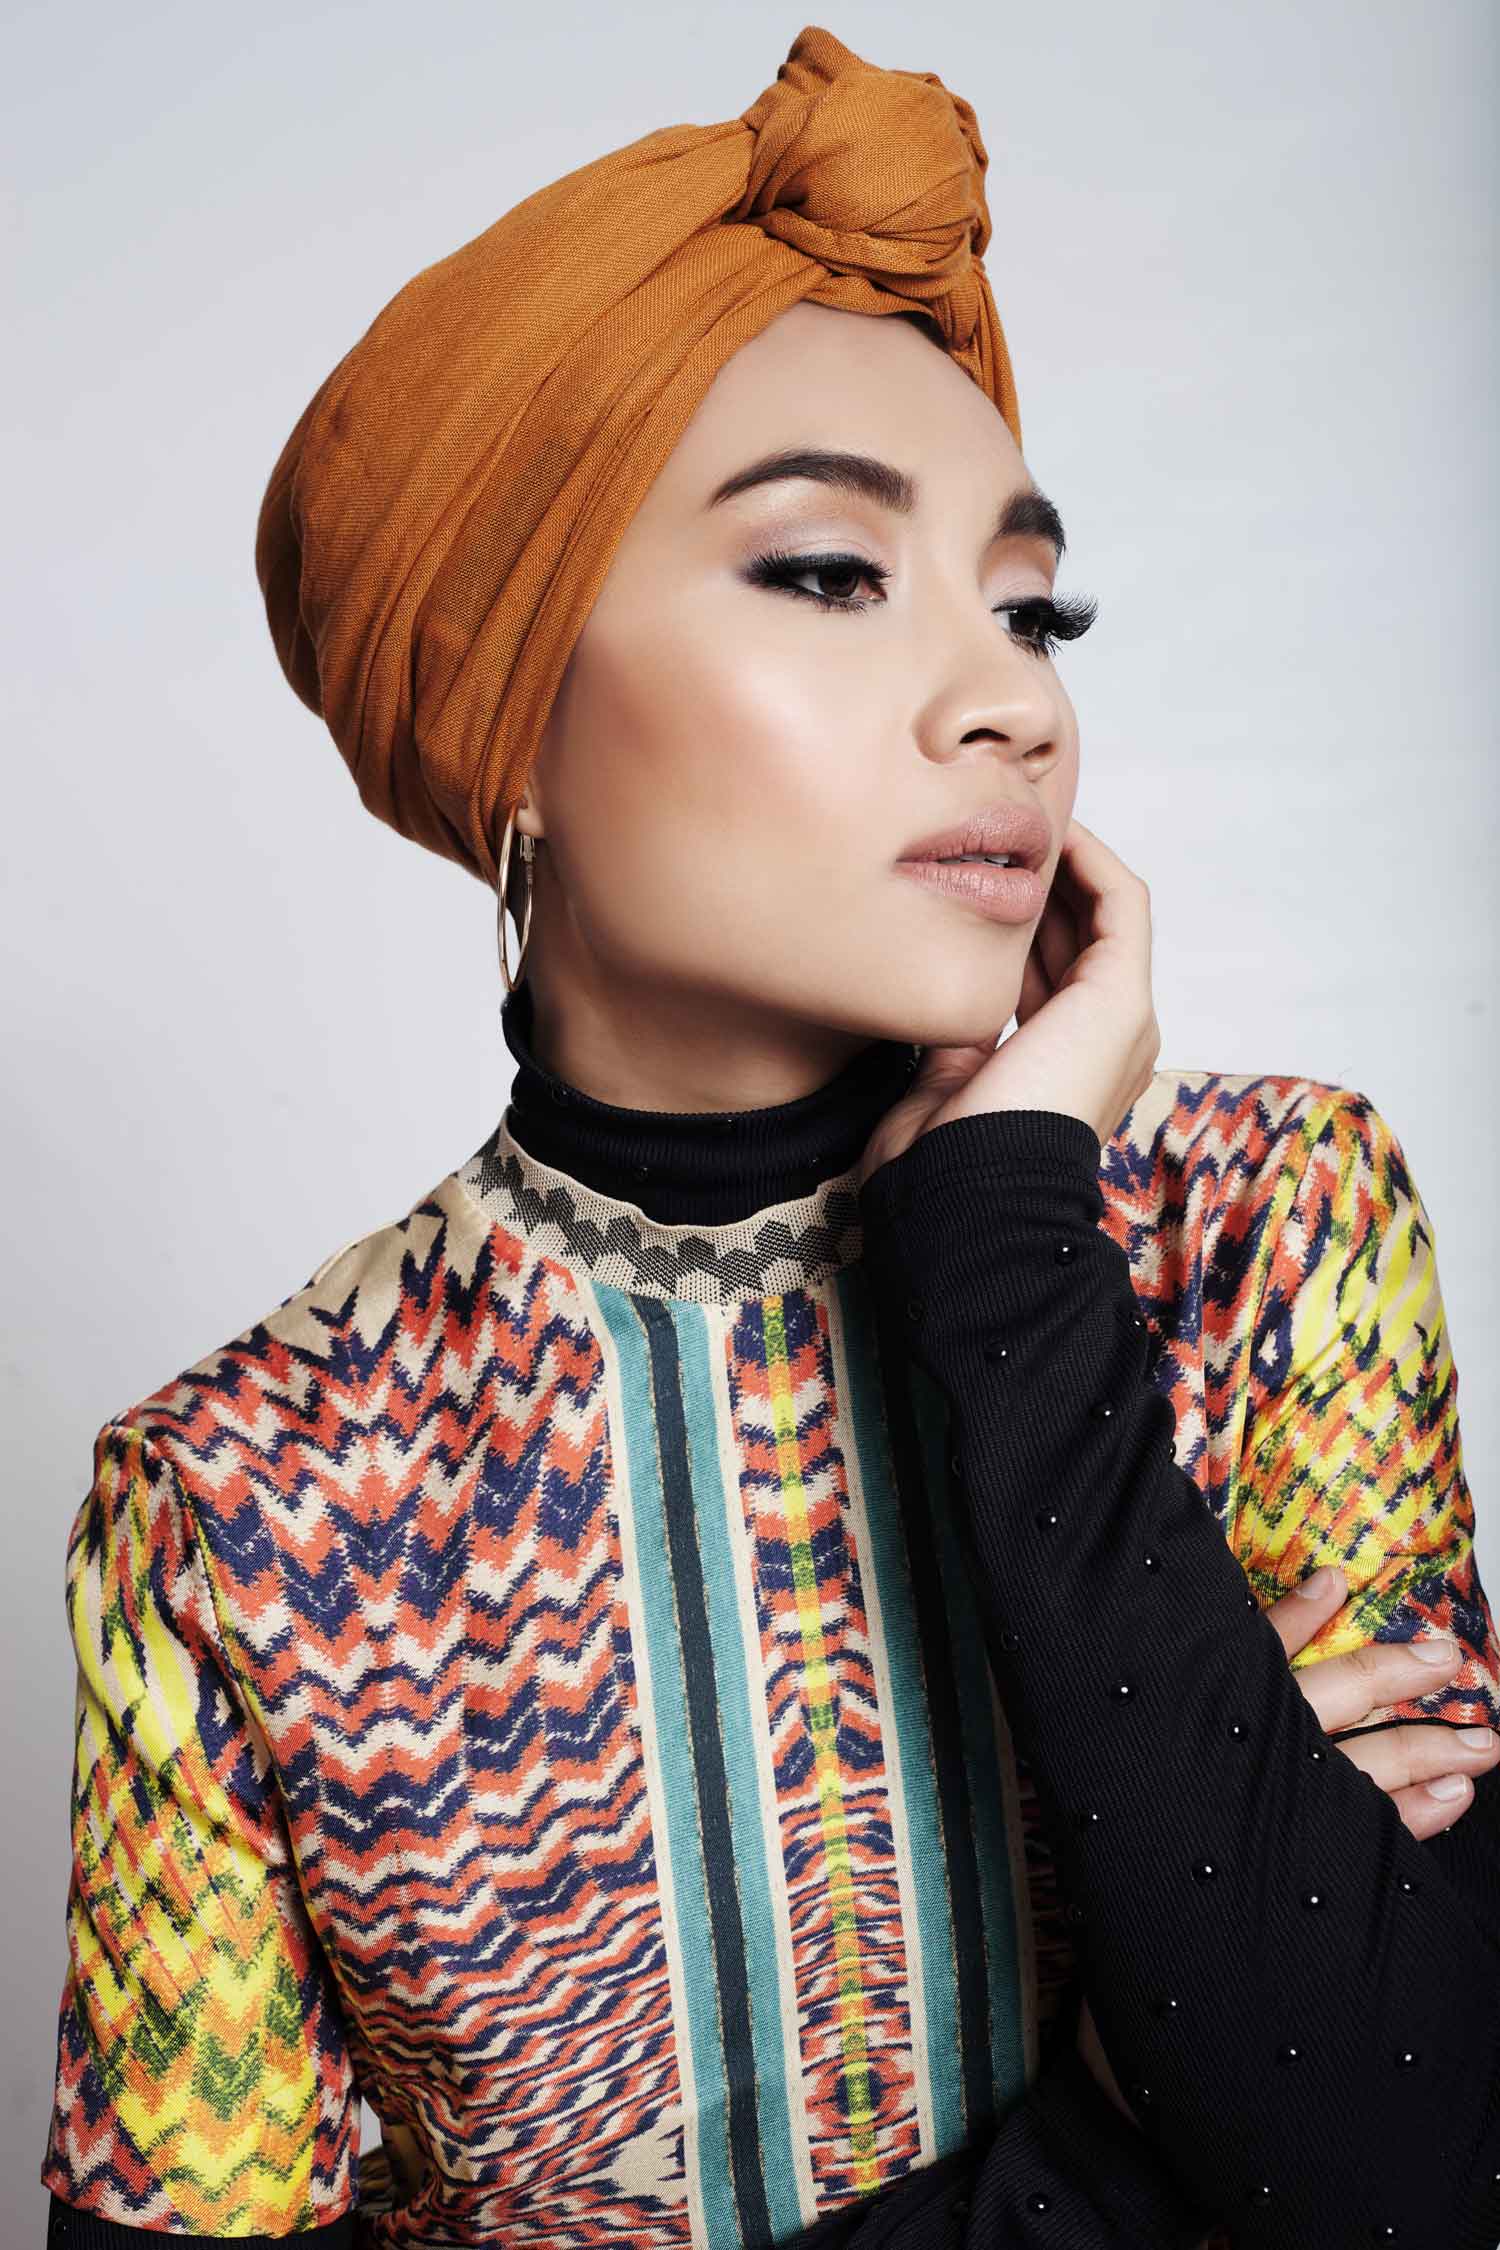 For Singer Yuna, Personal Style Is About the Journey